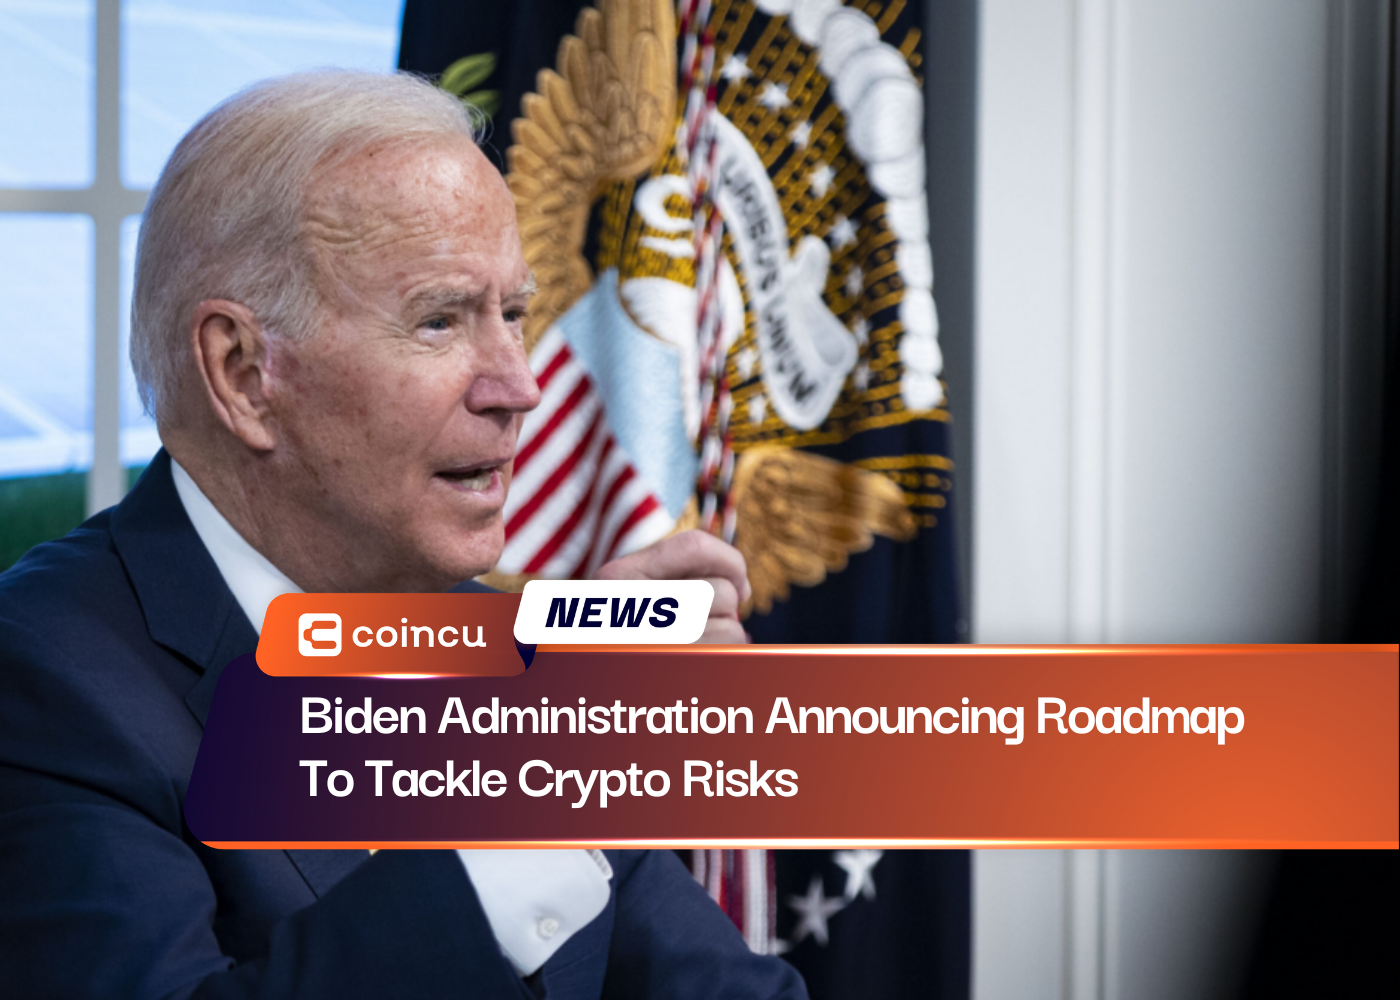 Biden Administration Announcing Roadmap To Tackle Crypto Risks